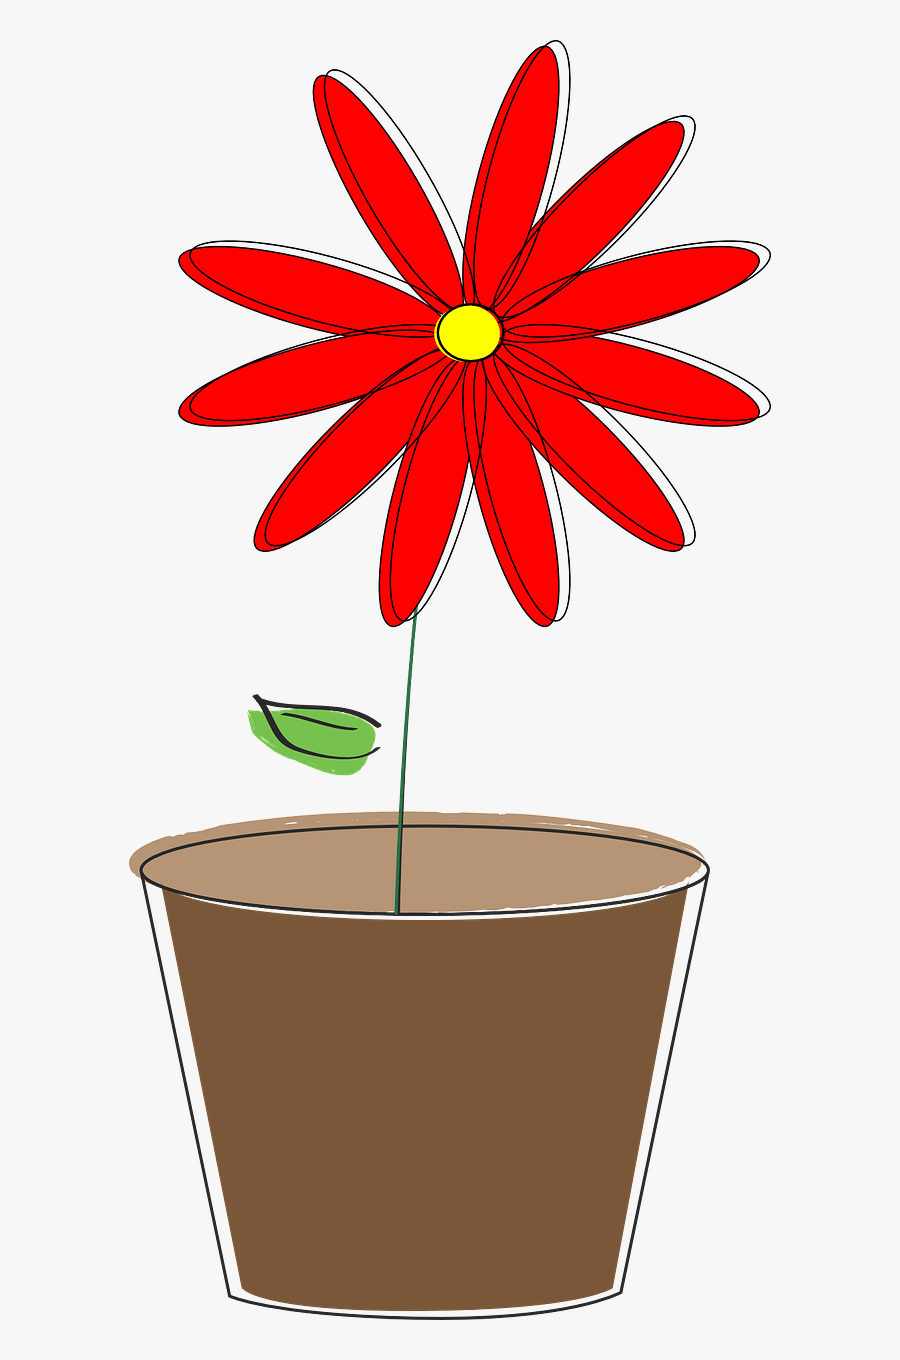 Potted Plant Flower Daisy Free Picture - Karuna Himalaya, Transparent Clipart